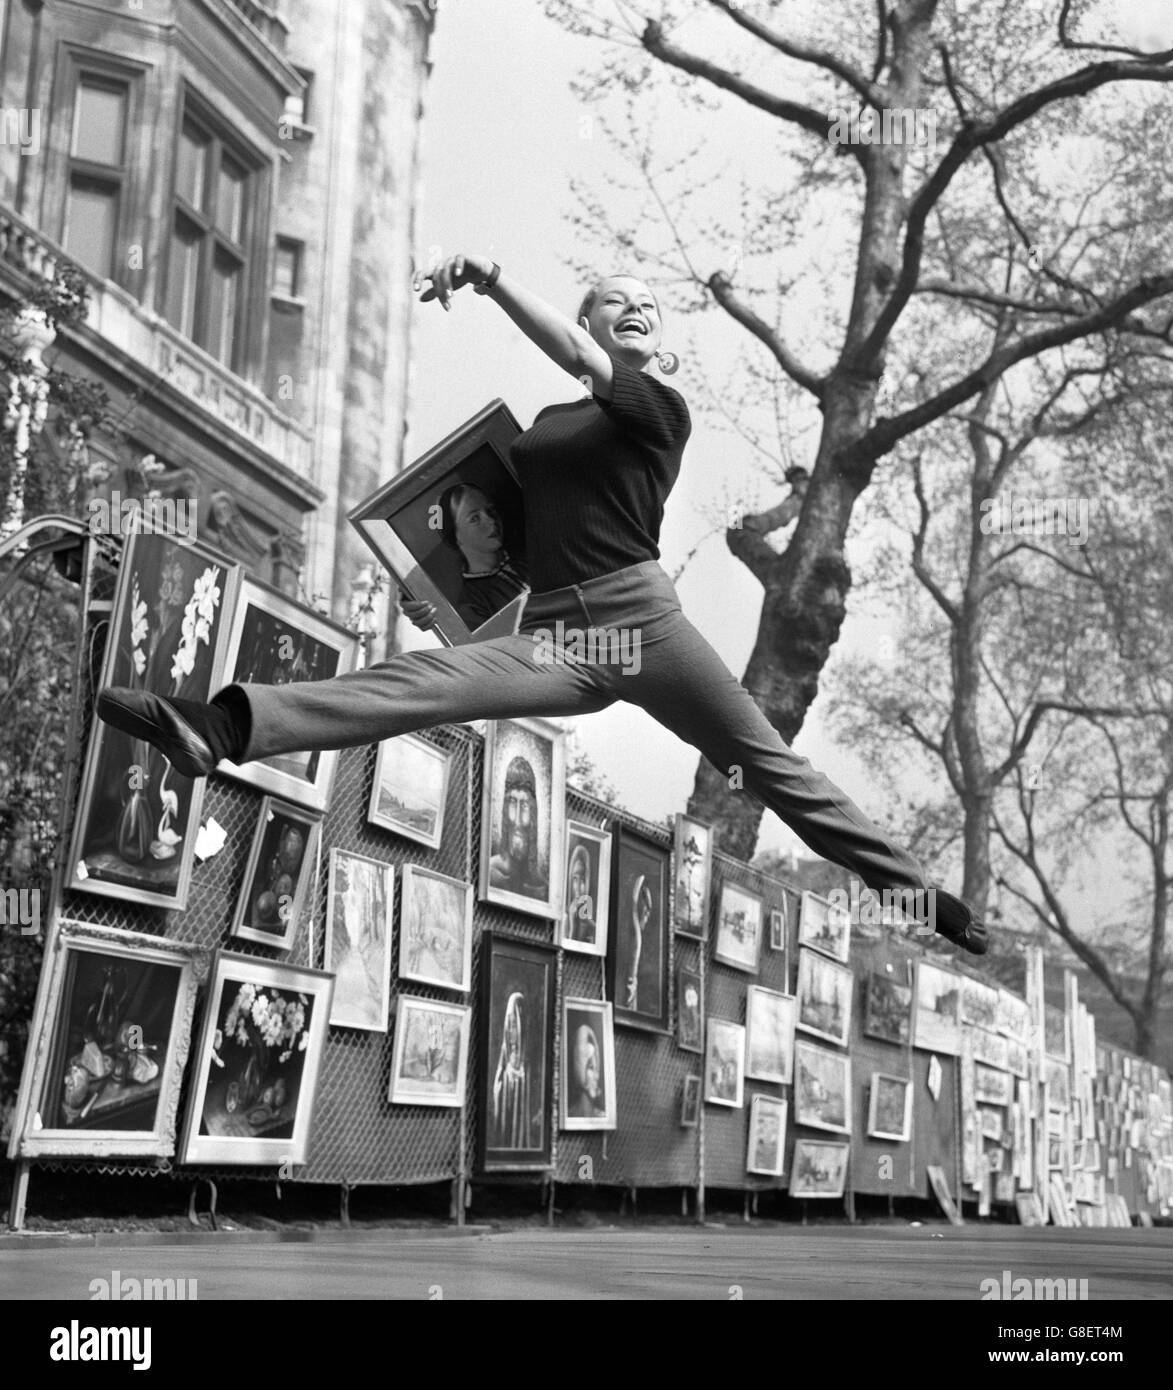 Dance student Wanda Bailey, 15, of Brighton, performs a leap while carrying one of her father's paintings at an open-air art show at the Victoria Embankment Gardens, London. It was organised by the Greater London Council. Stock Photo